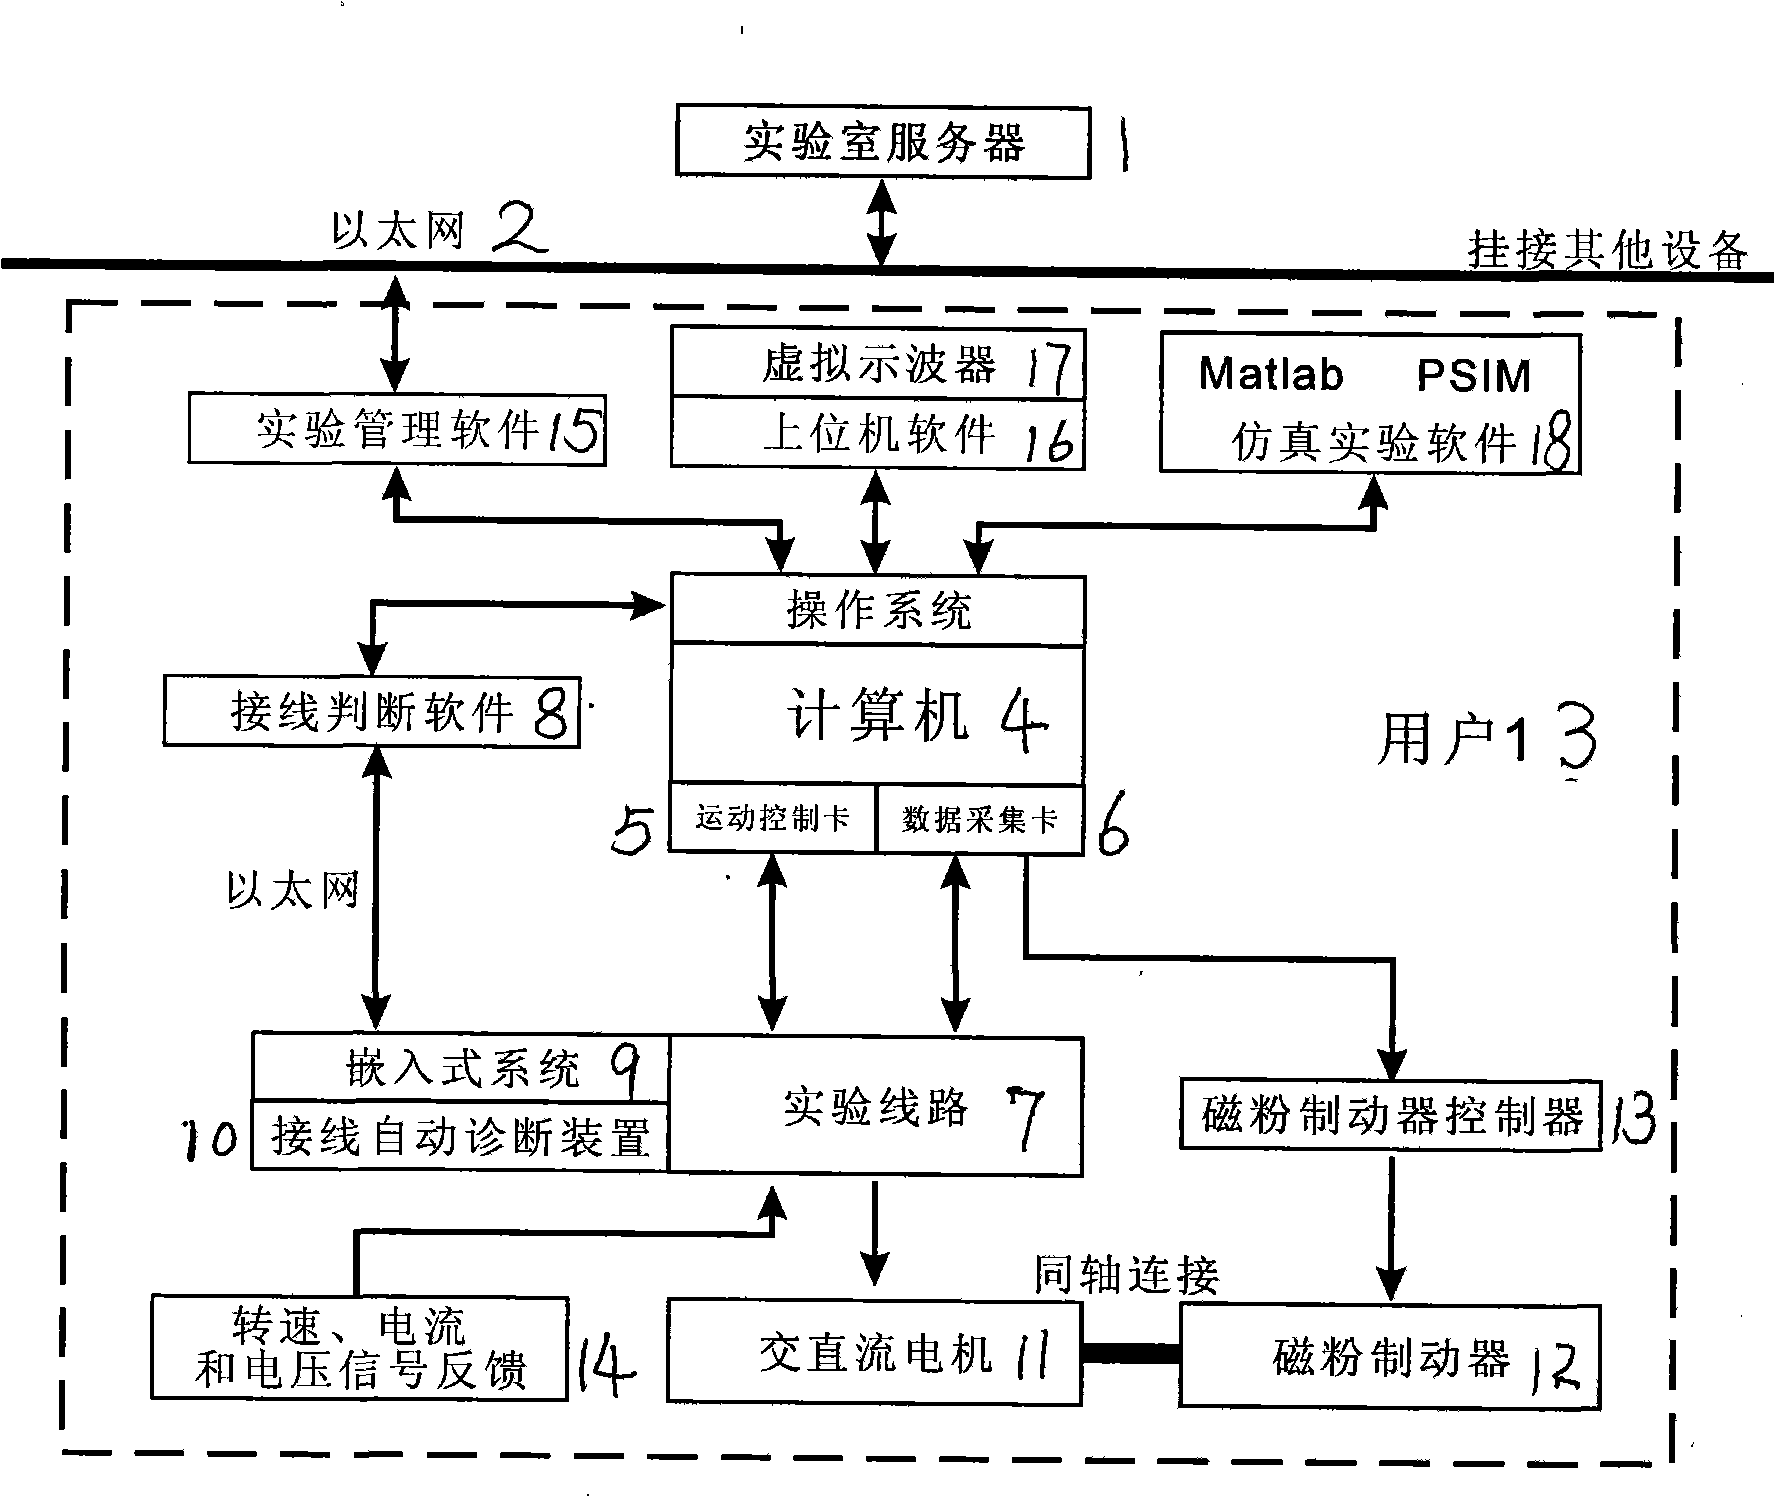 Complete digital control alternating current-direct current velocity modulation and load application system for teaching